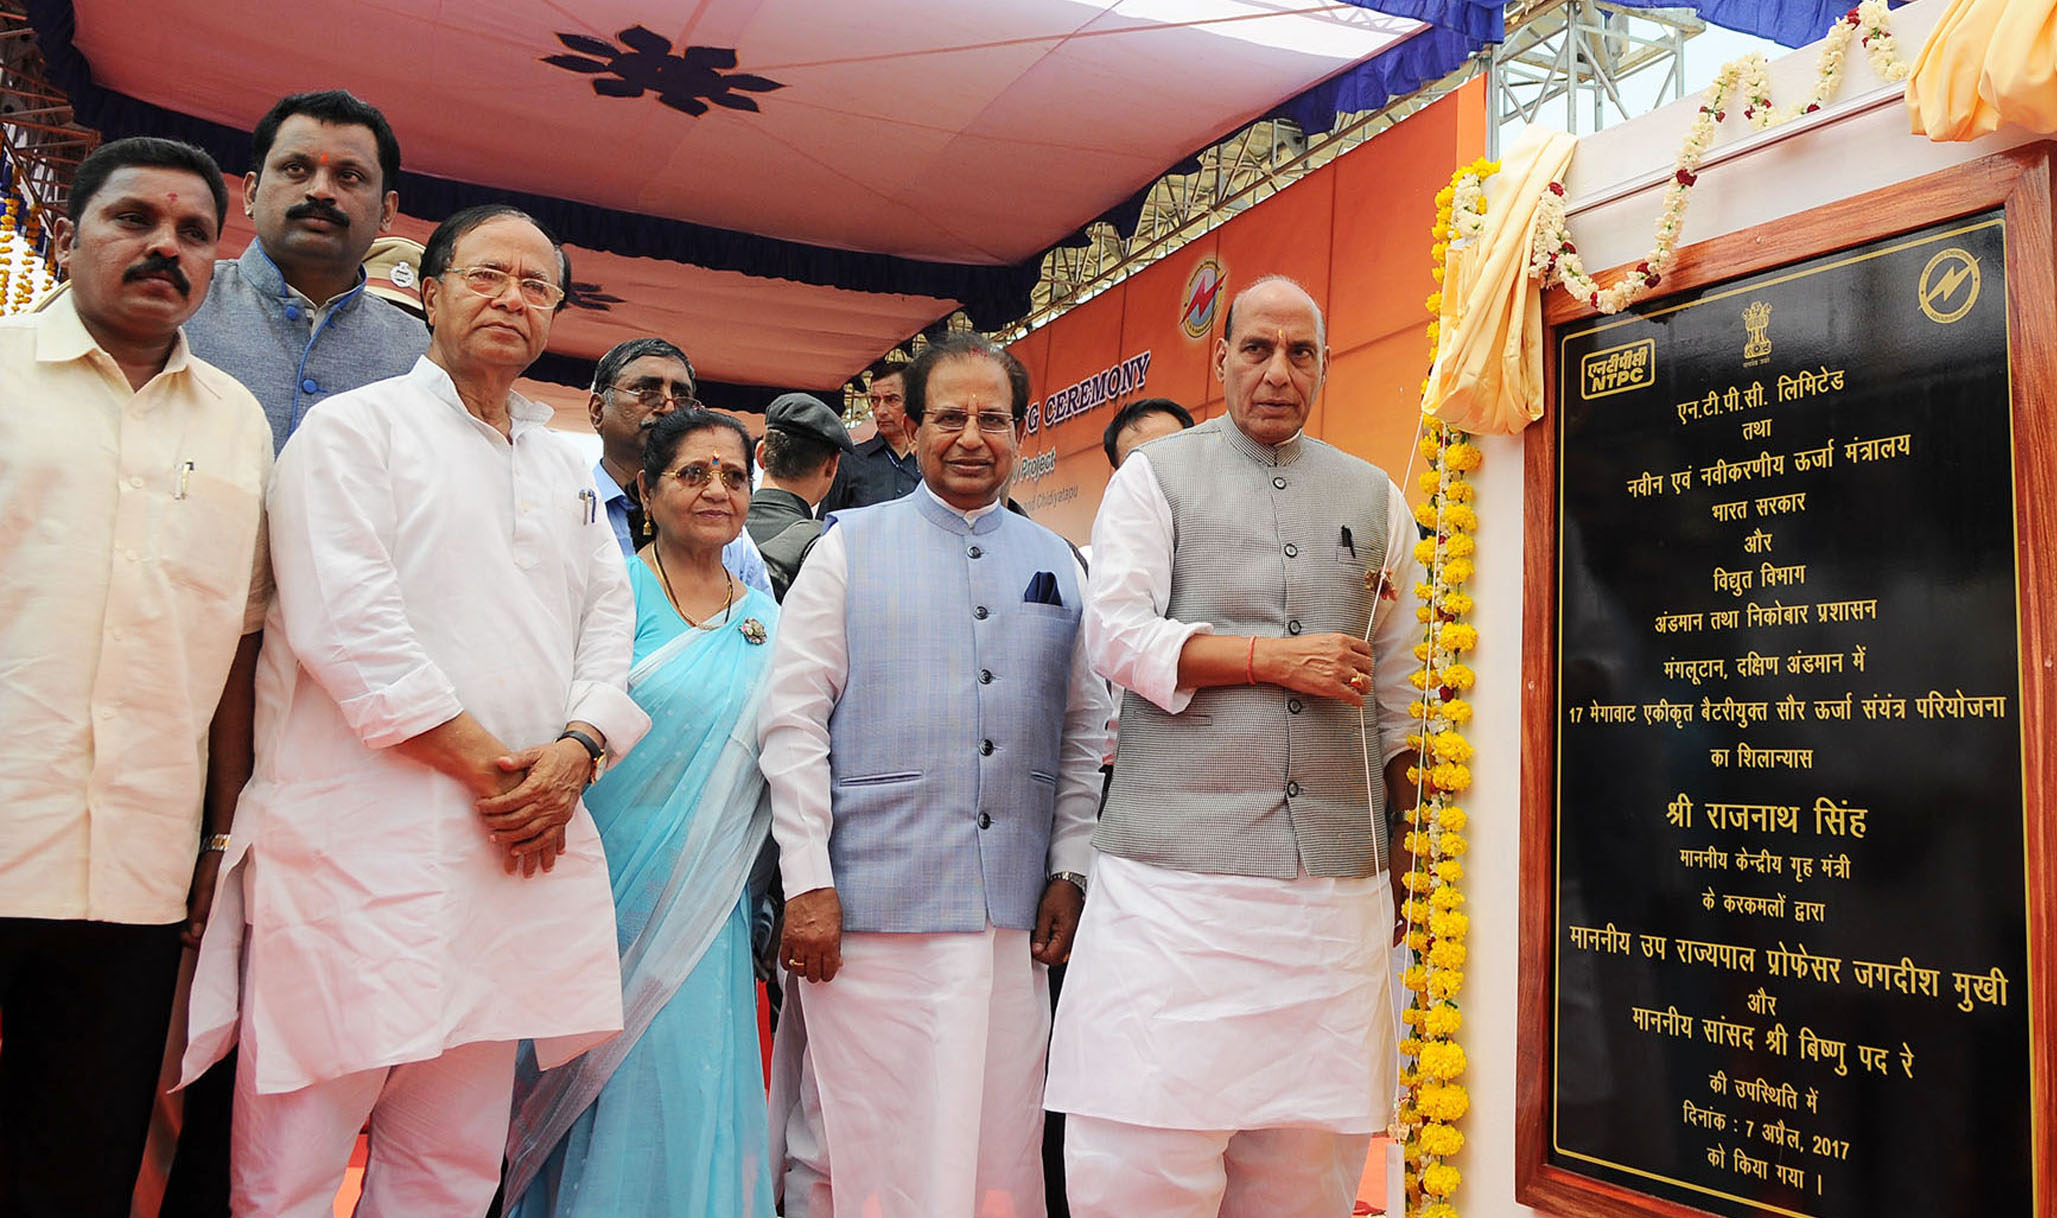 The Union Home Minister, Shri Rajnath Singh laying the foundation stone for solar power plant, at Manglutan, in South Andaman on April 07, 2017. 	The Lieutenant Governor of Andaman and Nicobar Islands, Prof. Jagdish Mukhi is also seen.